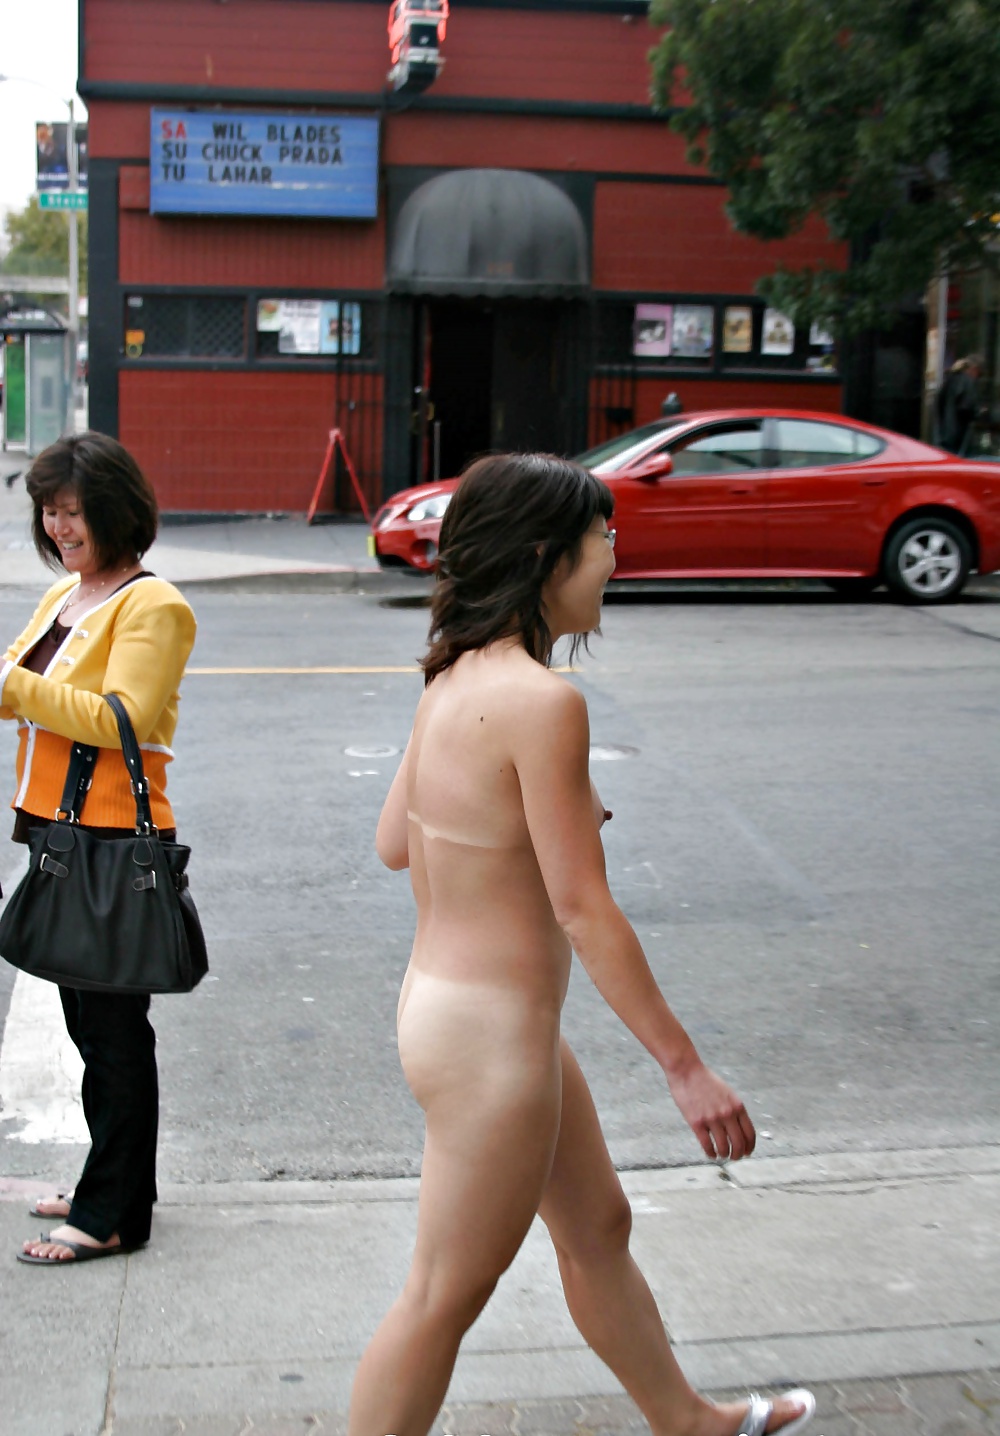 A naked walk in the city. #26598425